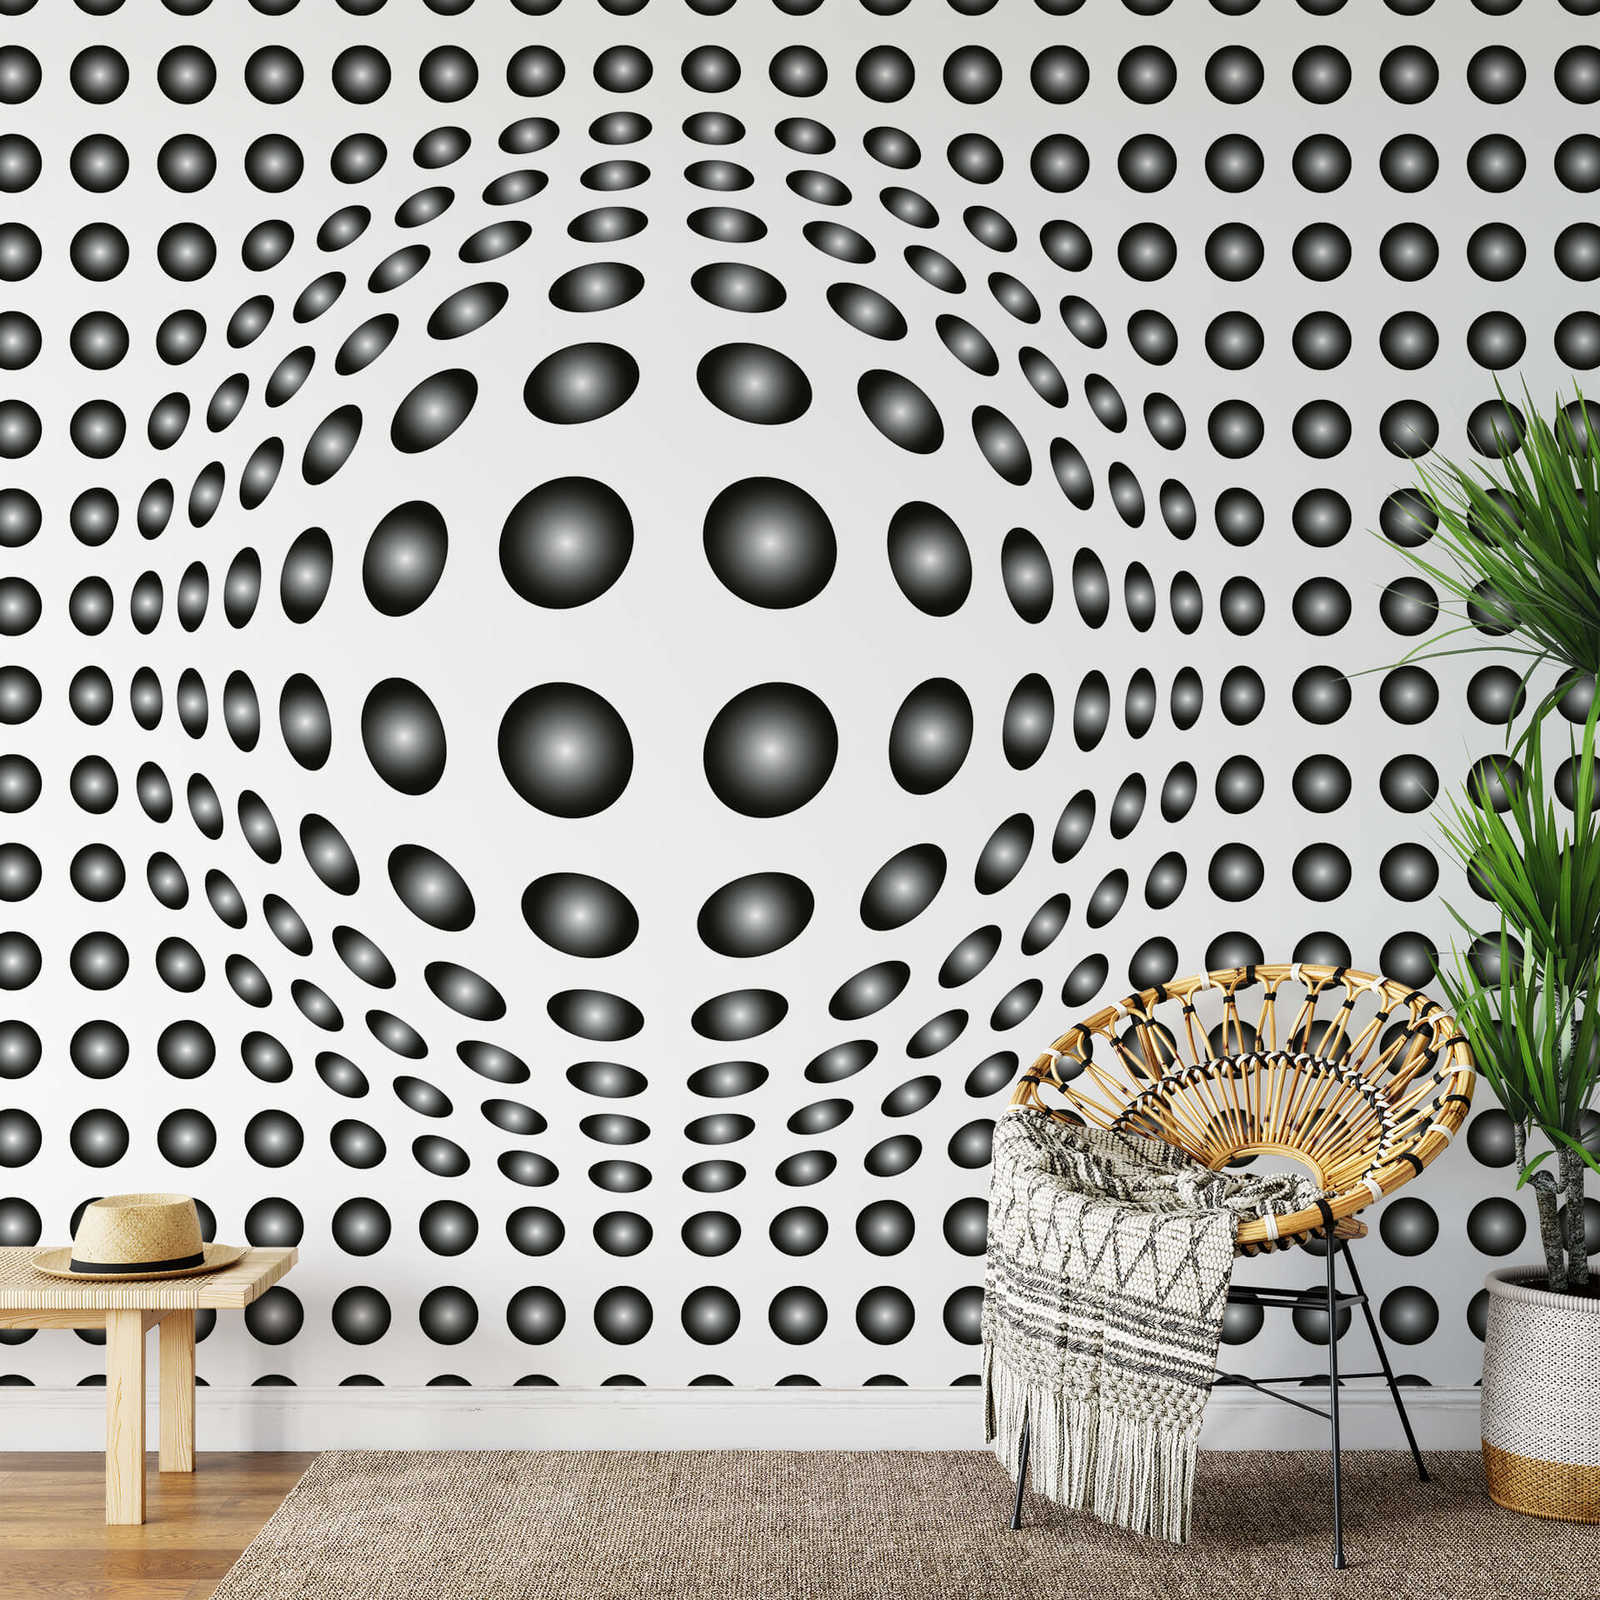             3D mural black and white with dot pattern
        